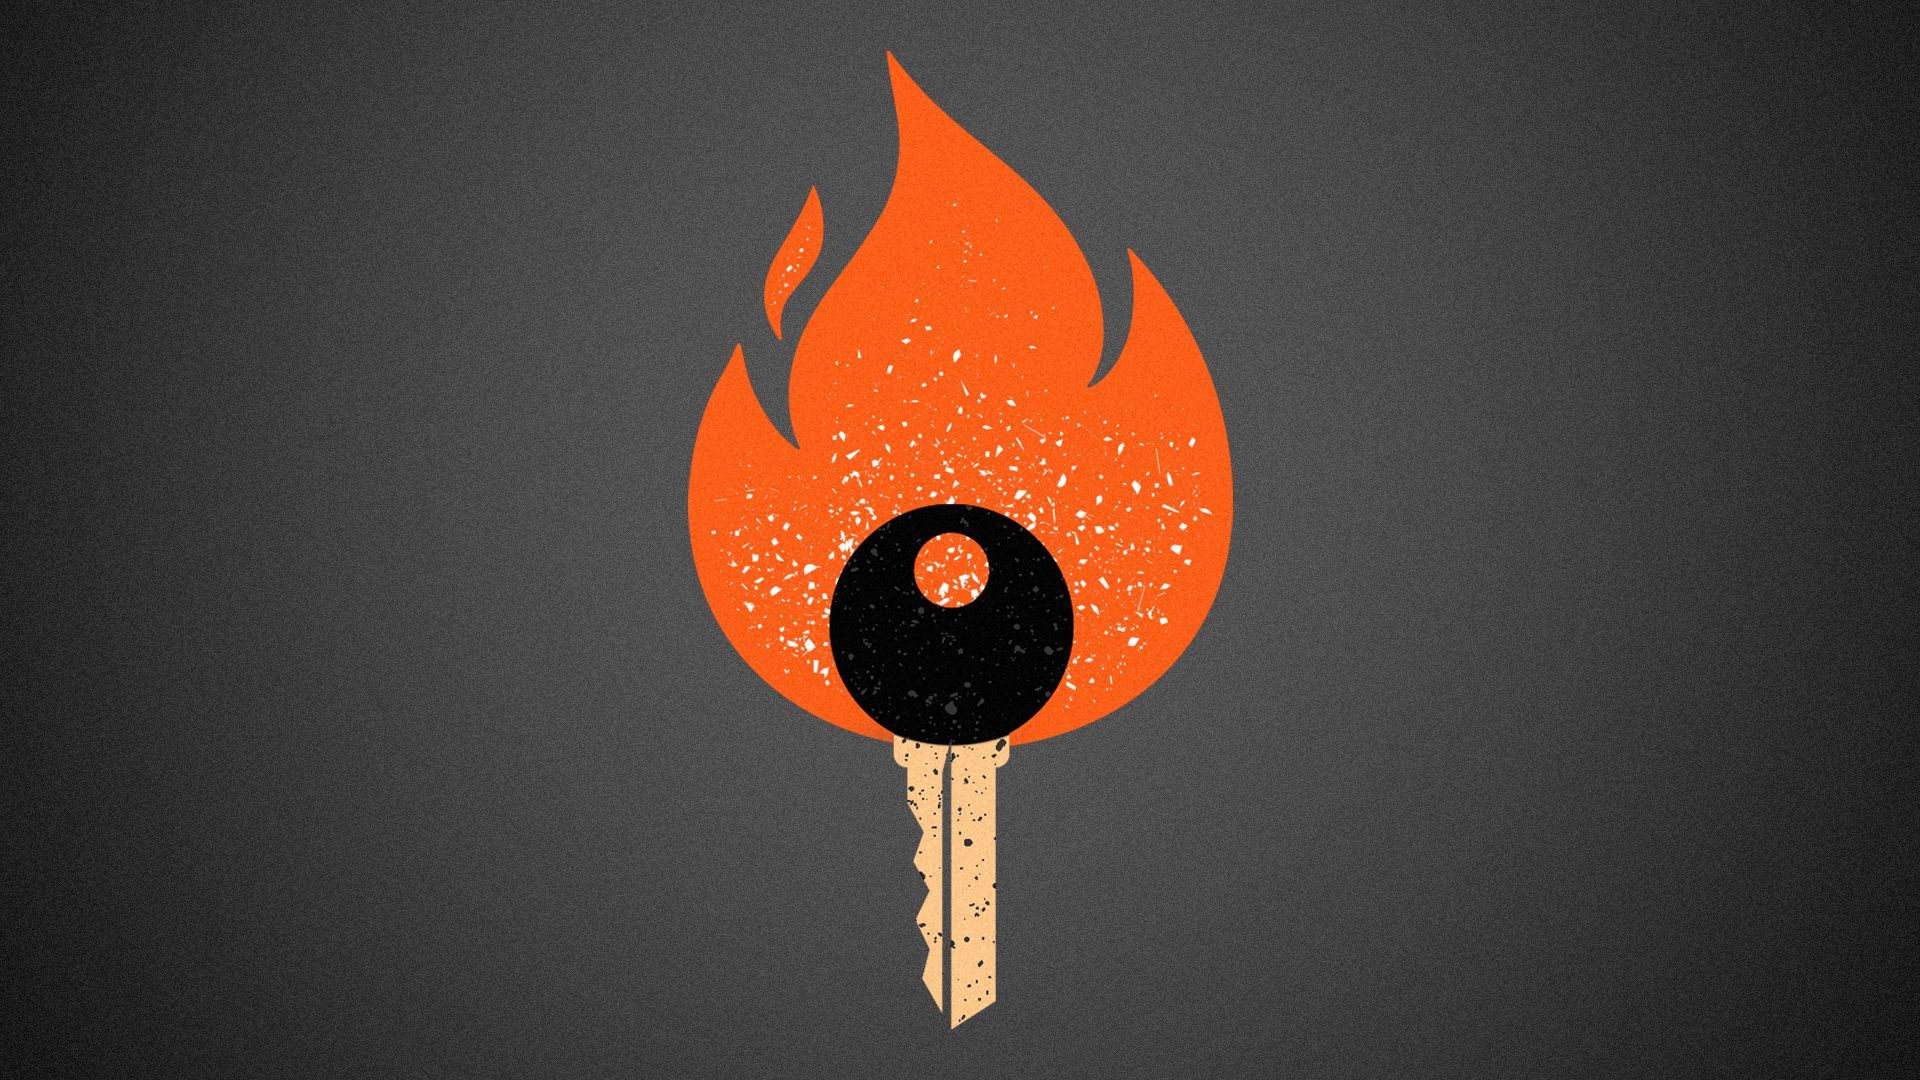 Illustration of a graphic style key design as a match on fire. 